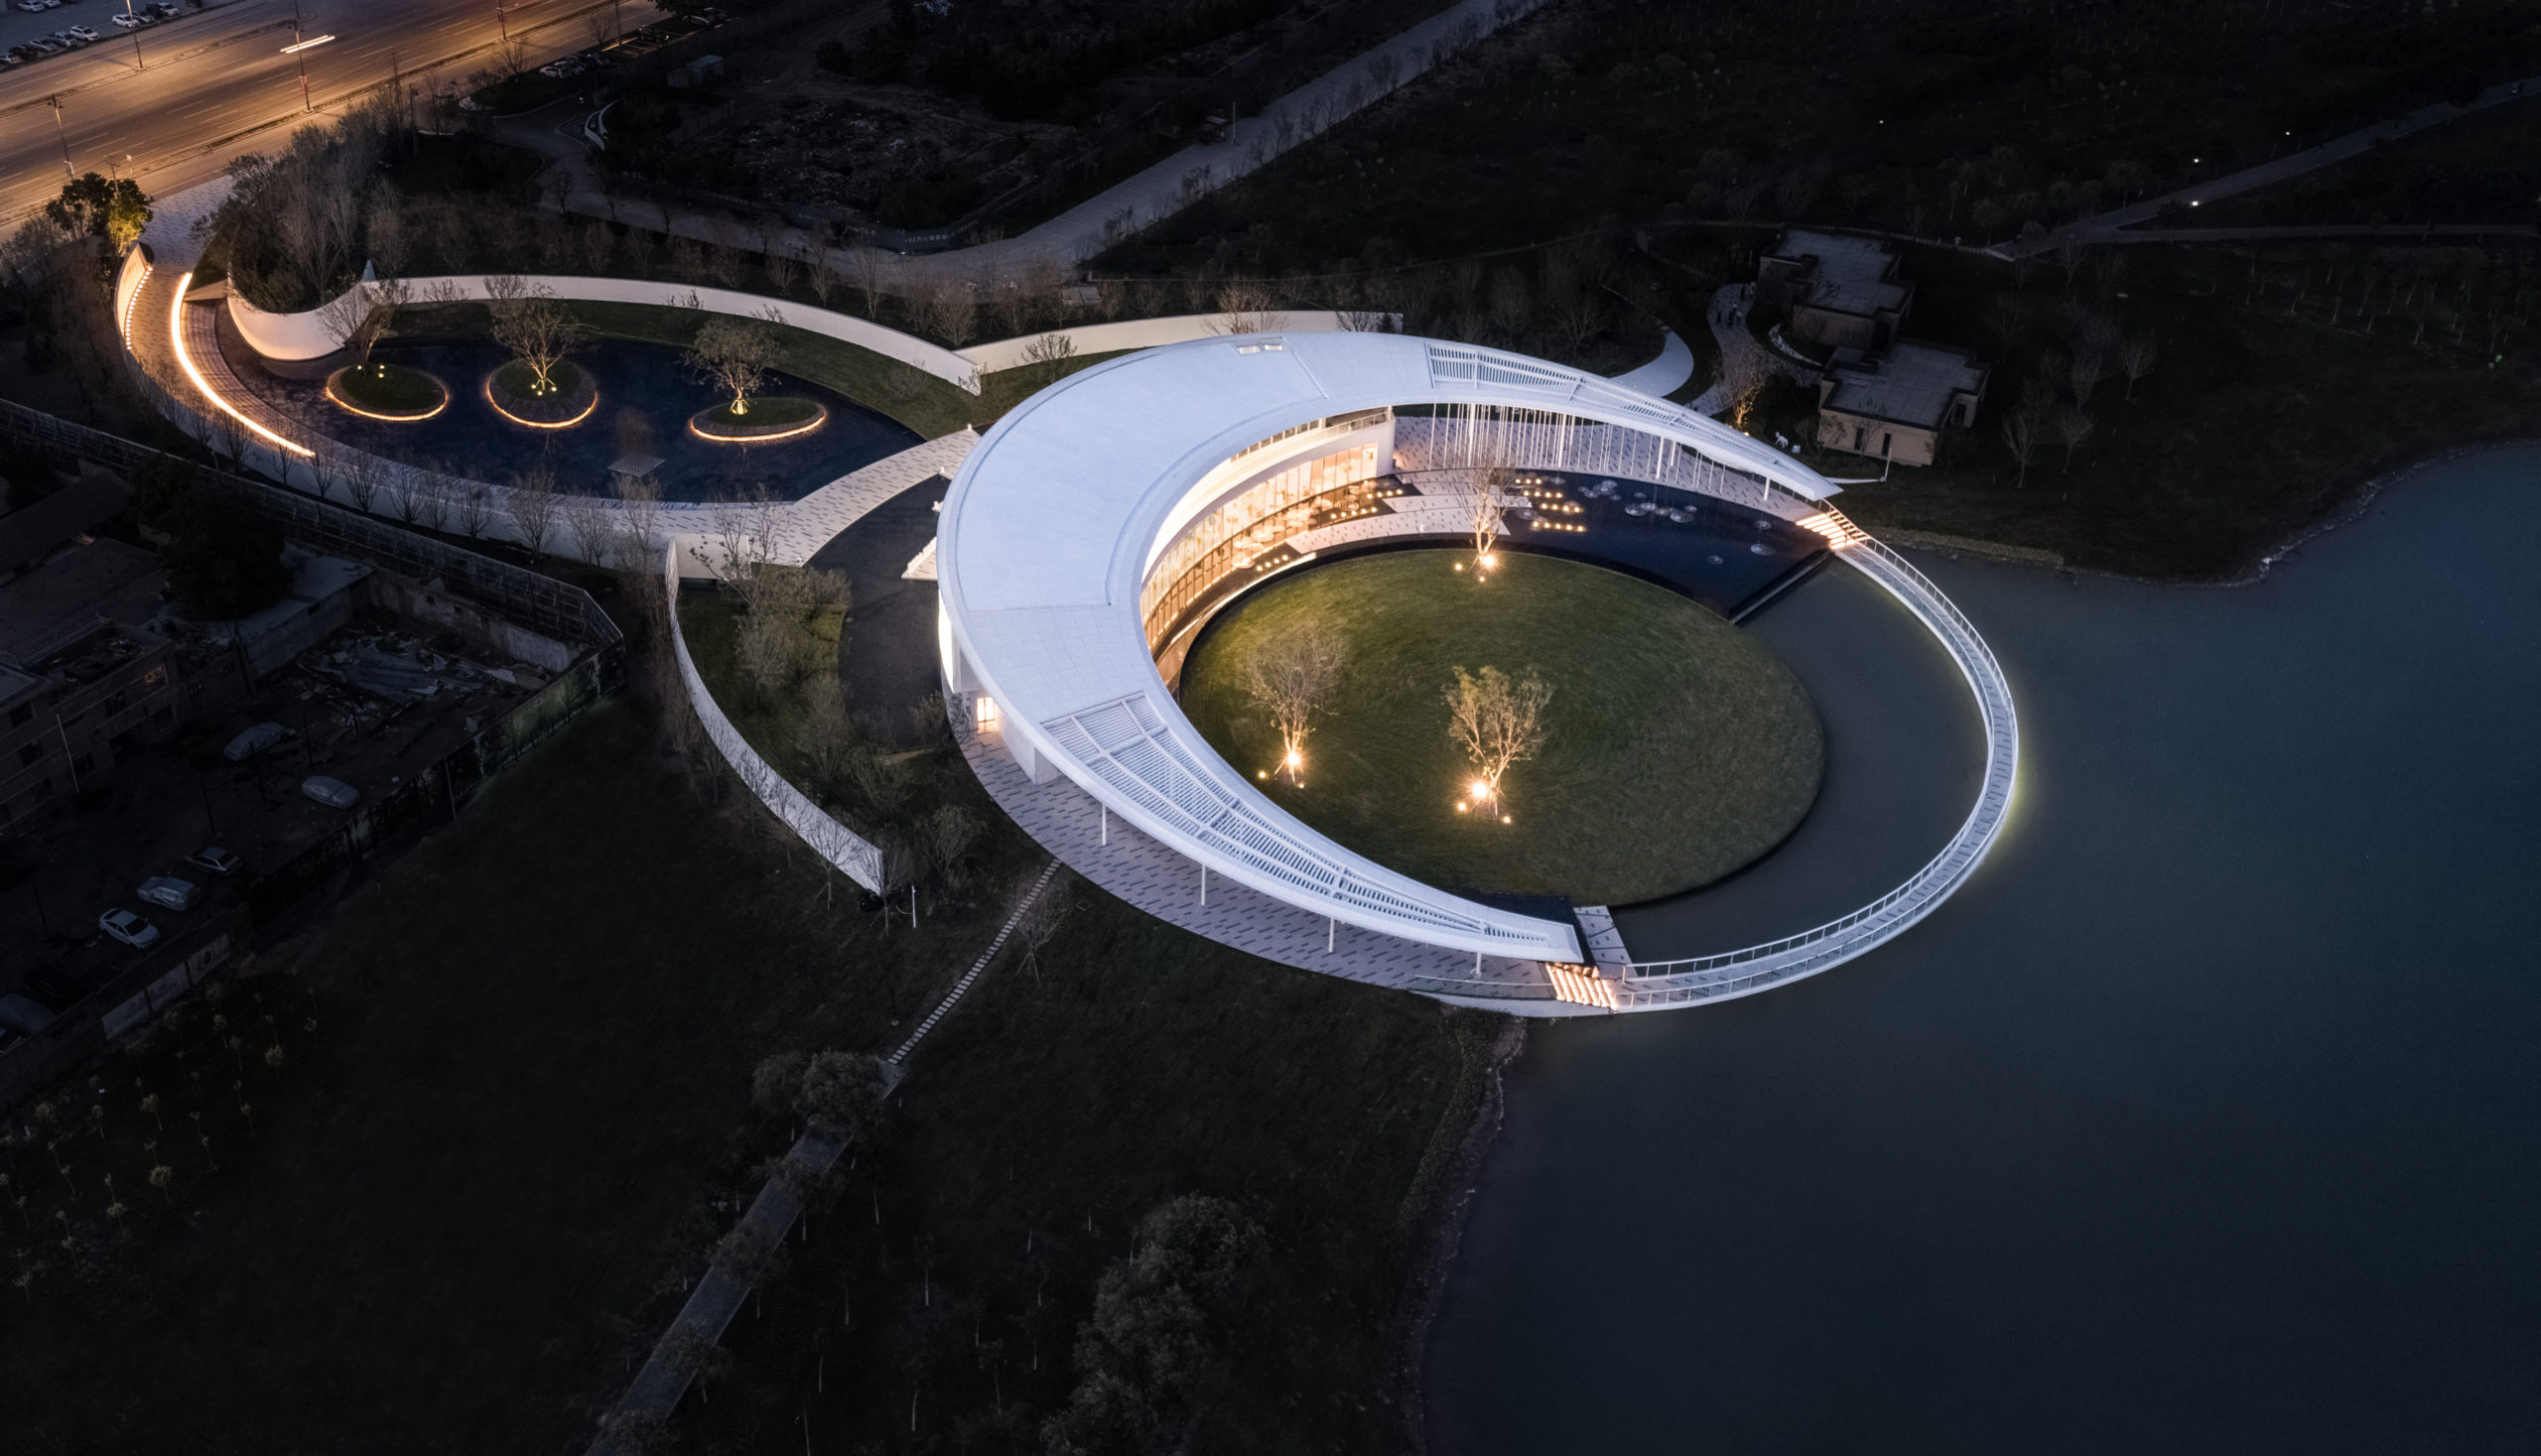 Yinchuan Sunac City Exhibition Center by Arch-Age-Design(AAD), Yinchuan, China